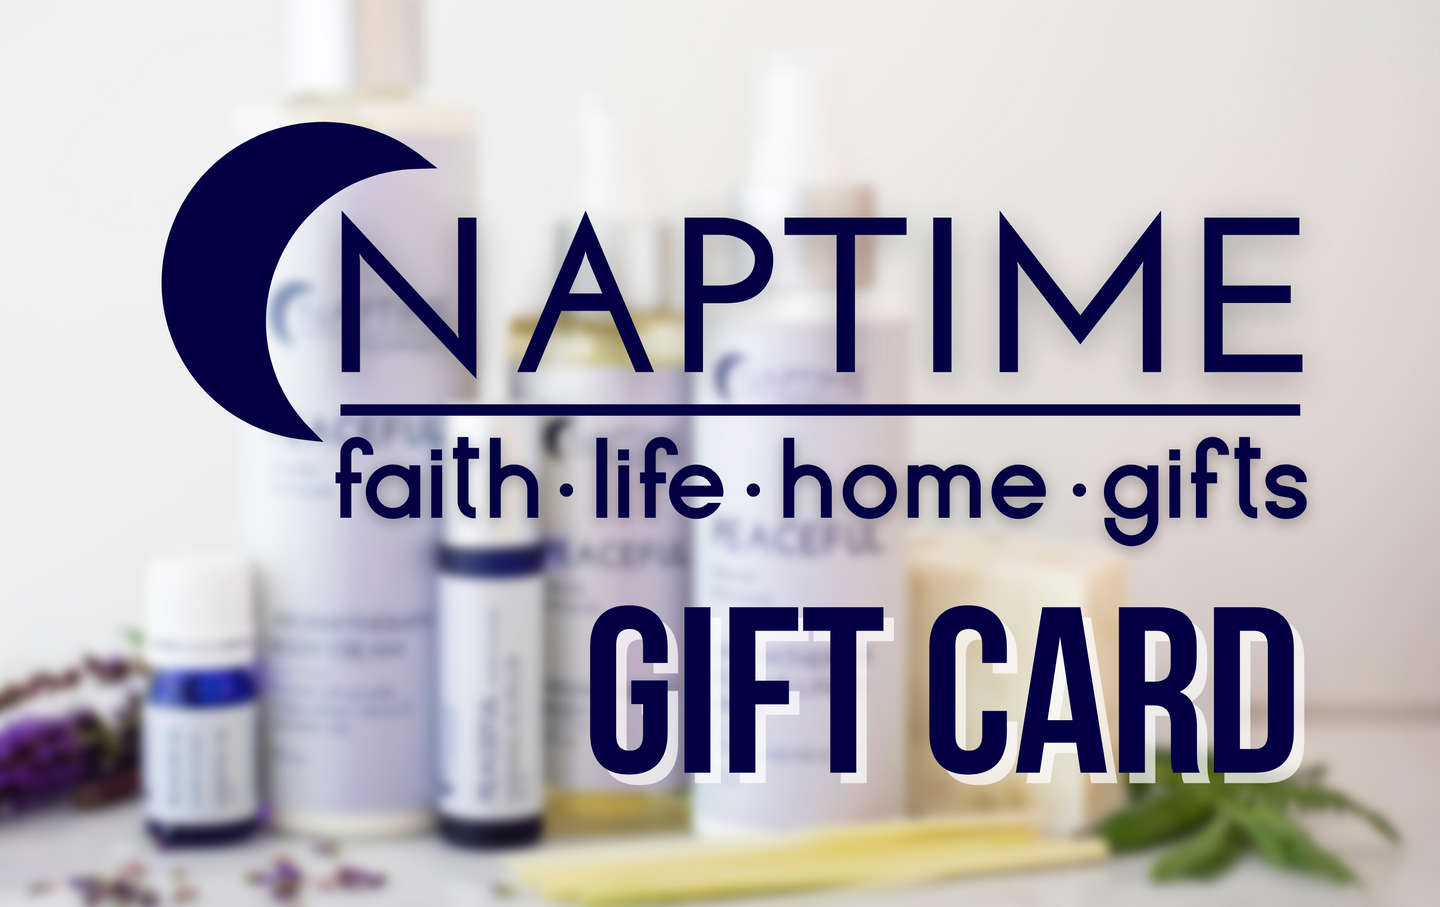 Faith & Life Gift Cards - Buy $50, Get $10 For FREE!